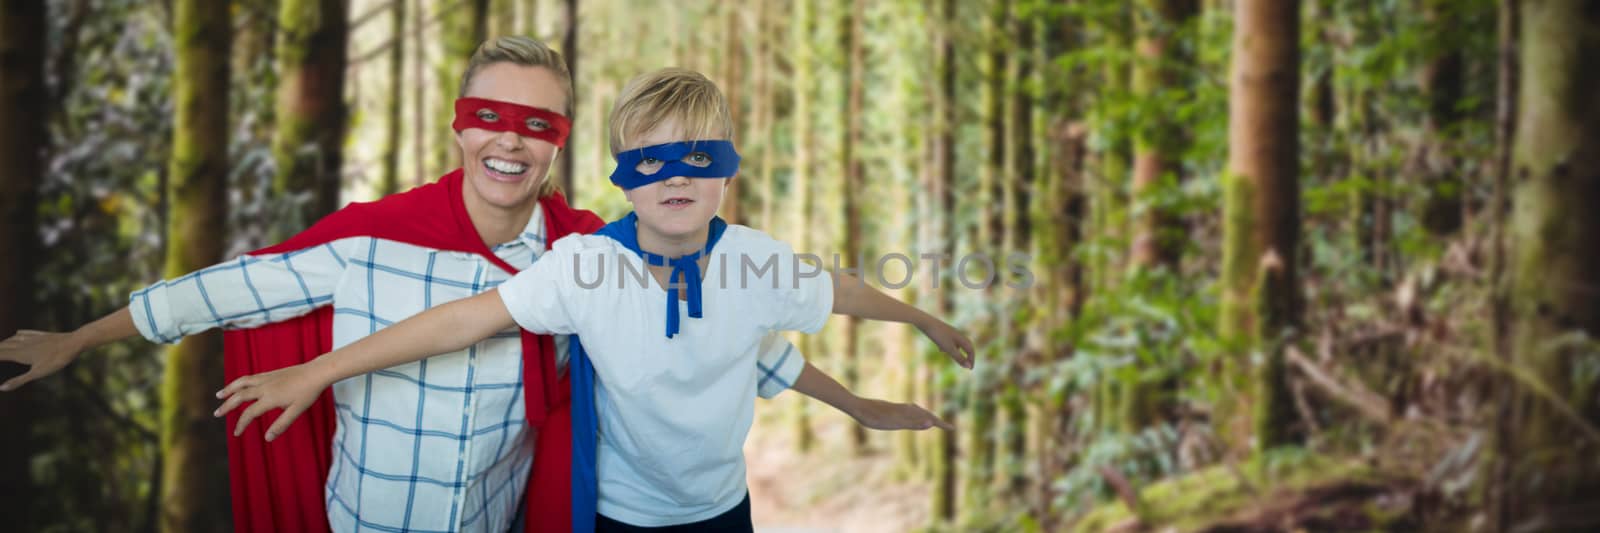 Mother and son pretending to be superhero against empty footpath amidst trees 